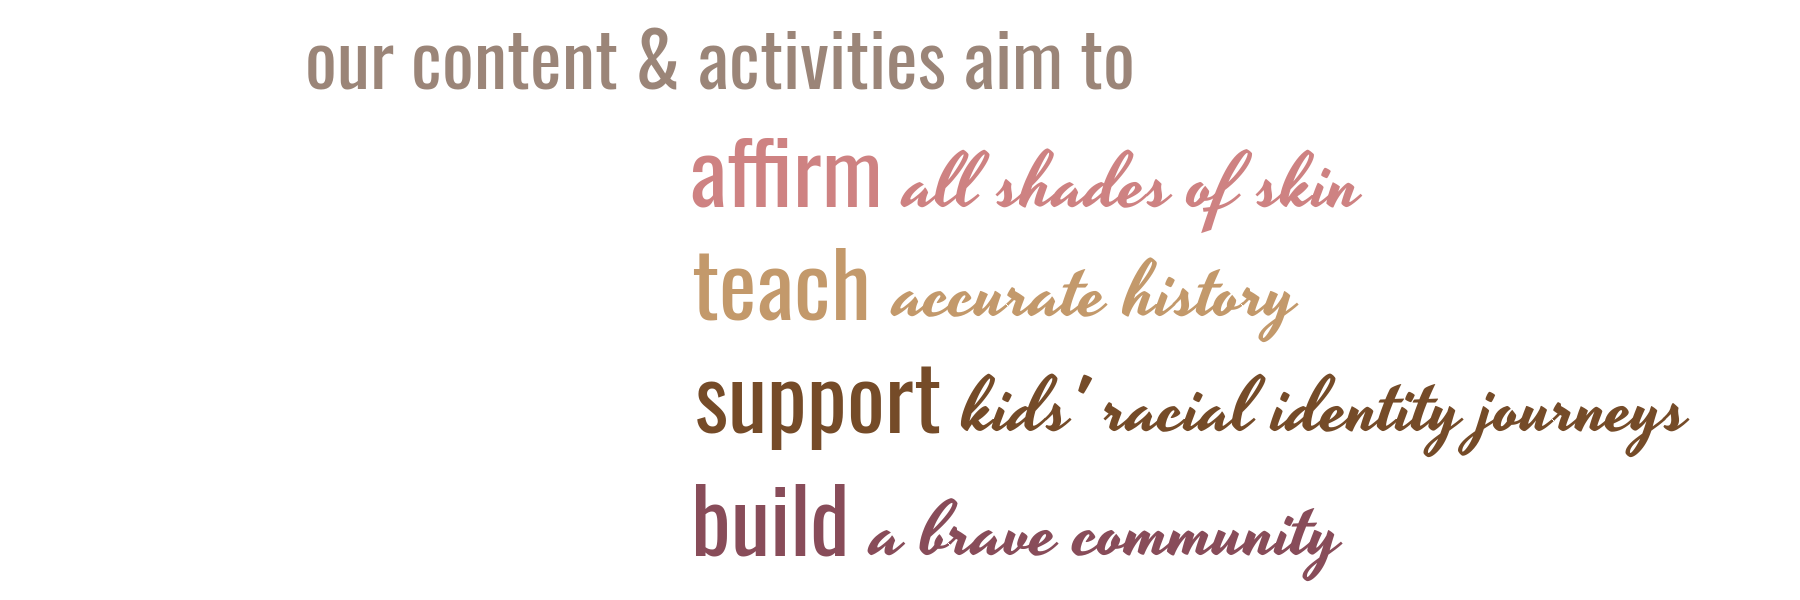 Our content & activities aim to...affirm all shades of skin; teach accurate history; support kids' racial identity journeys; build a brave community